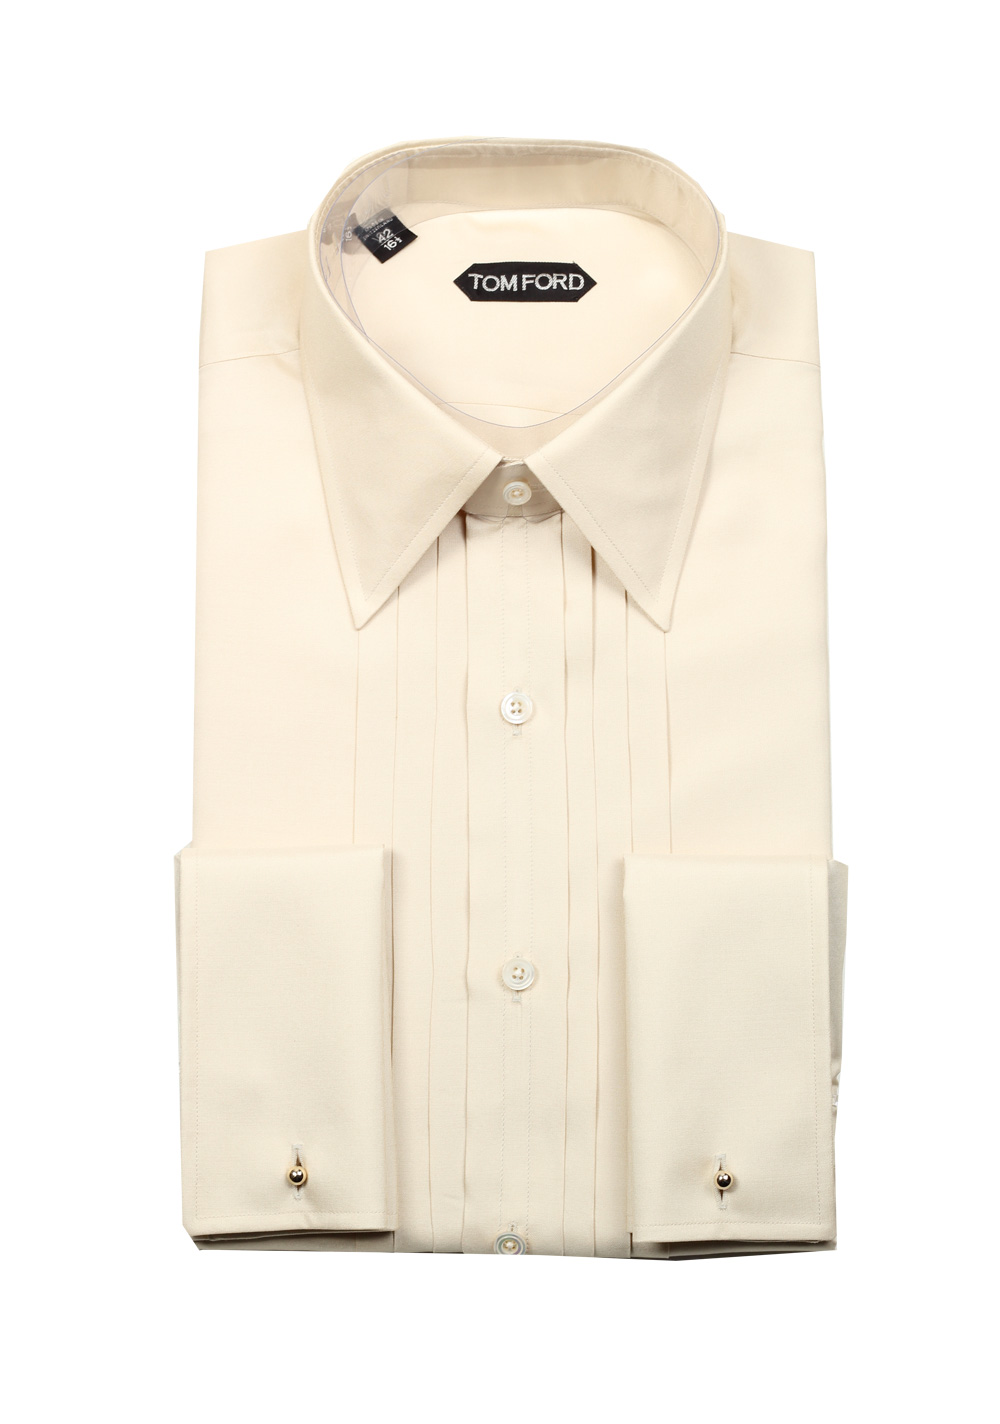 TOM FORD Solid Off White Charmeuse Evening Tuxedo Shirt Size 42 / 16,5 U.S. | Costume Limité